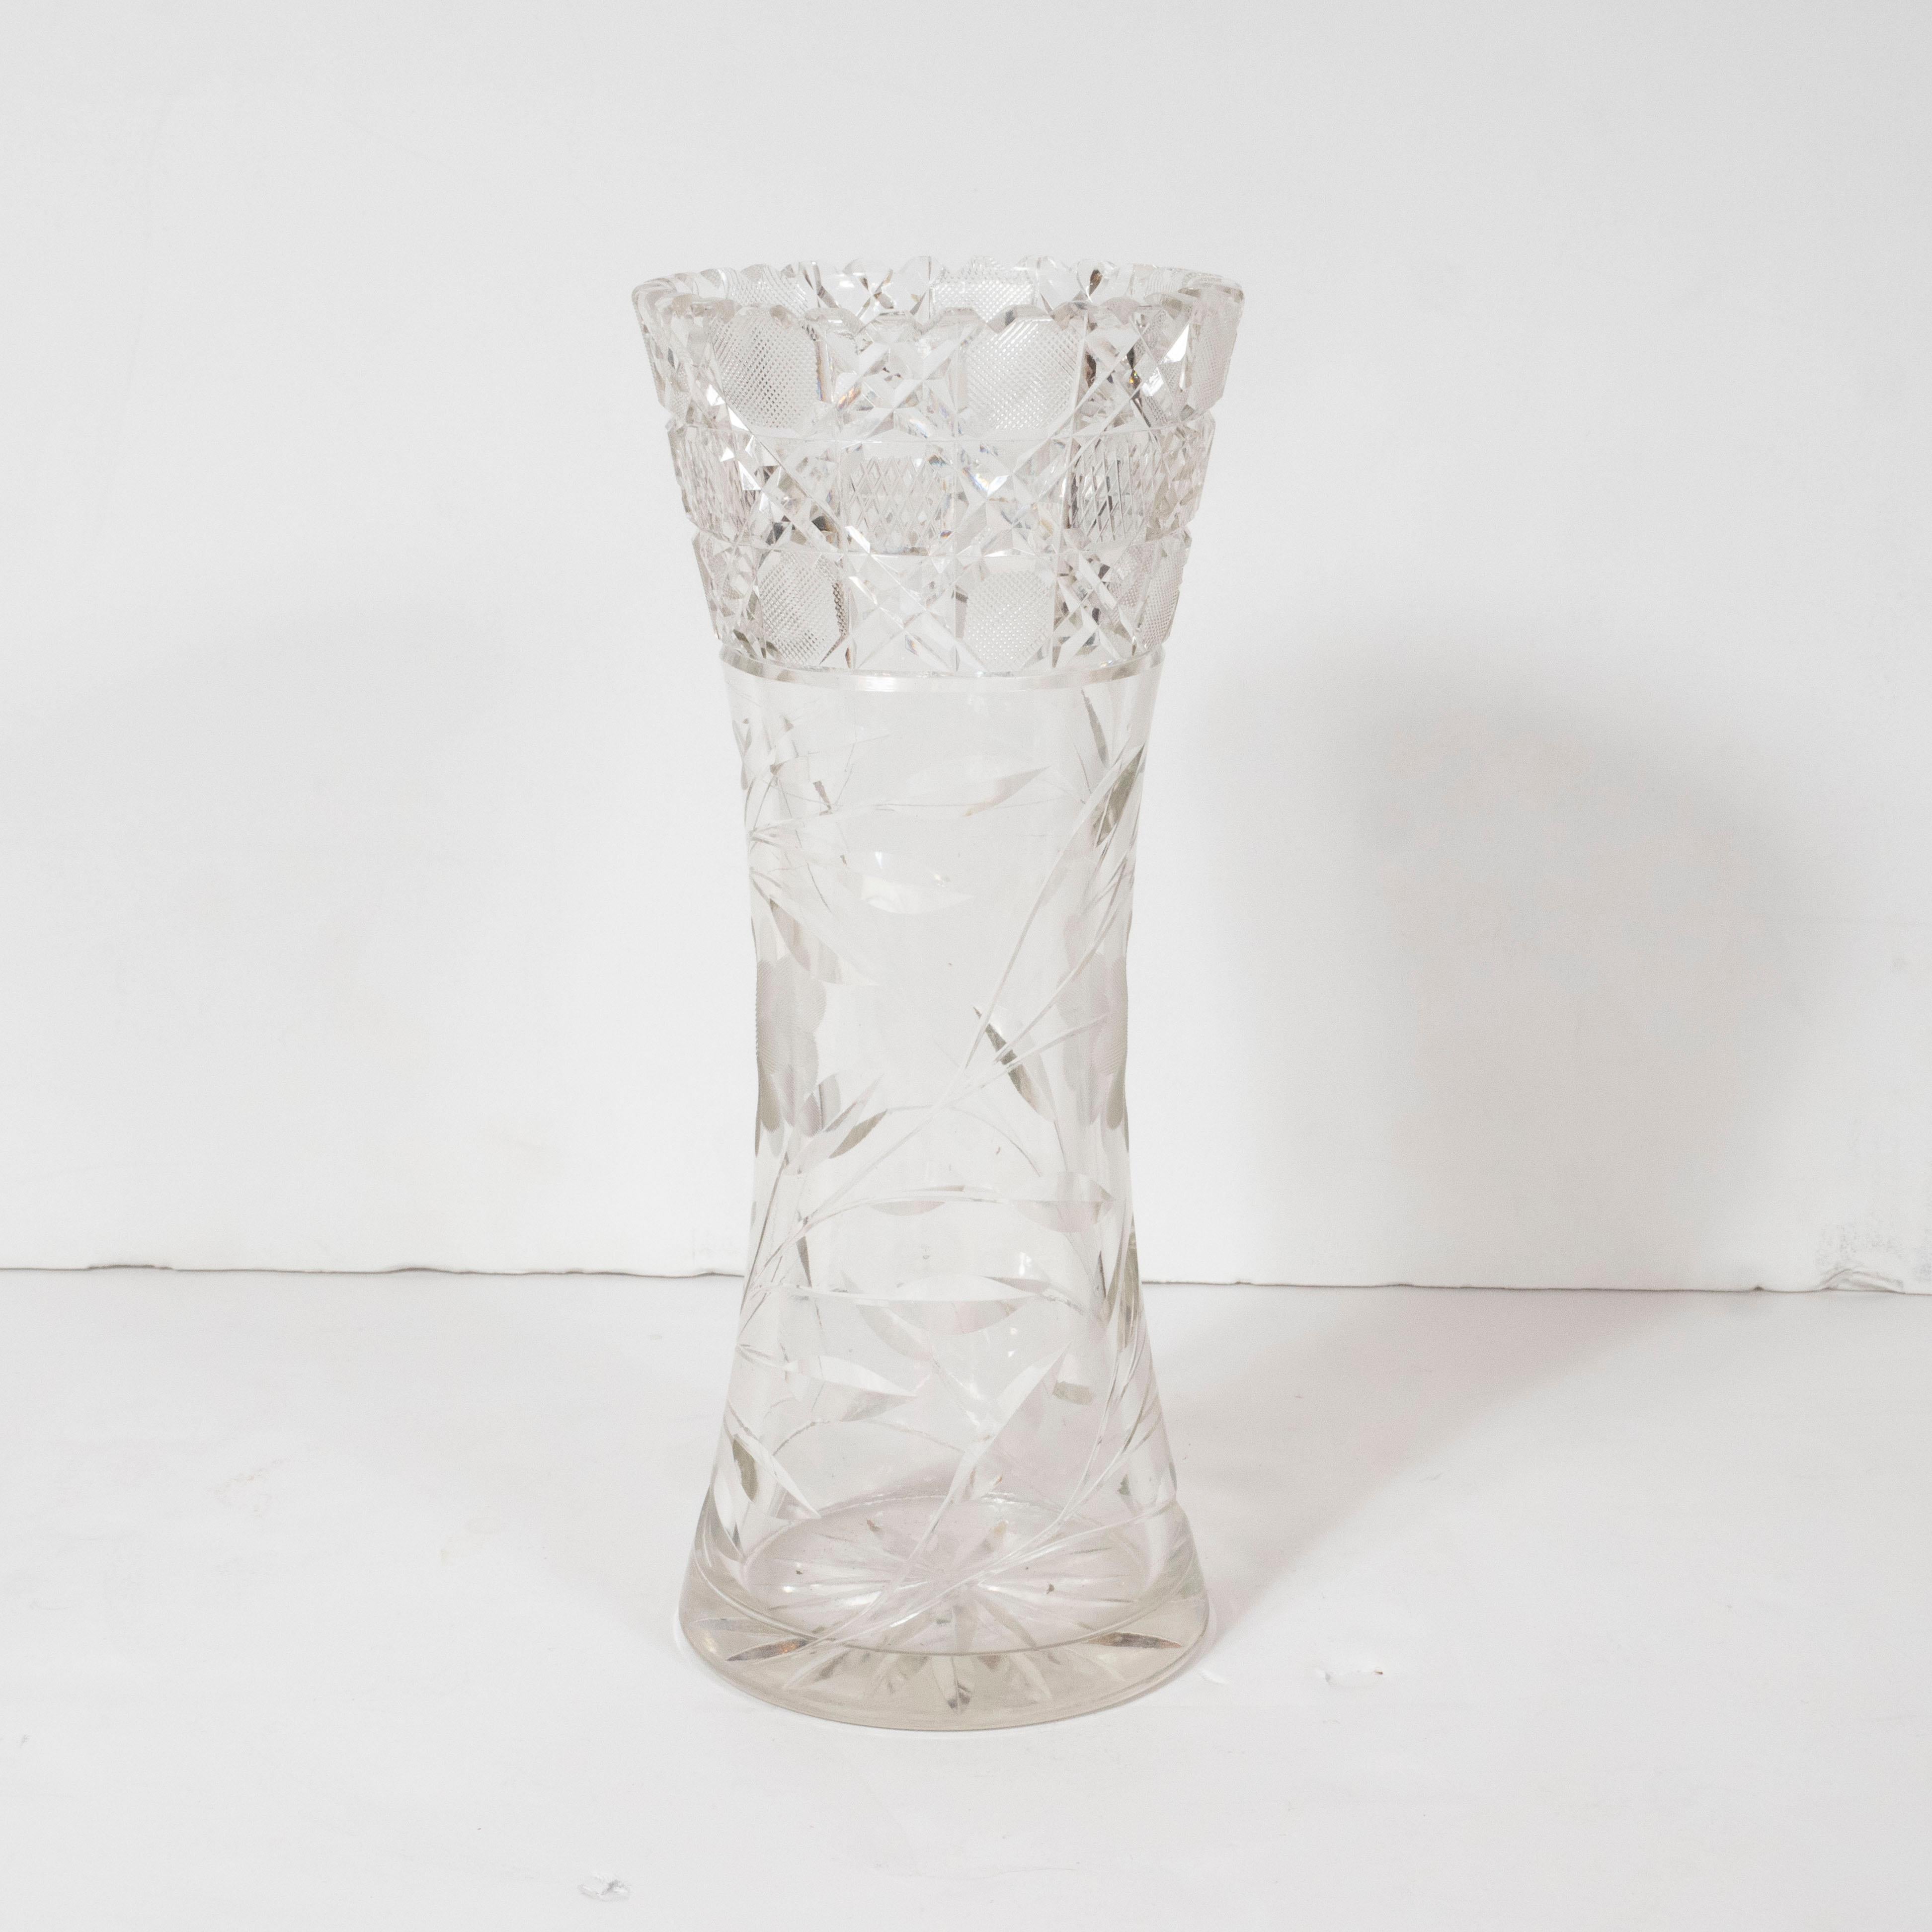 American Art Deco Brilliant Cut Glass Vase with Etched Floral Designs 1